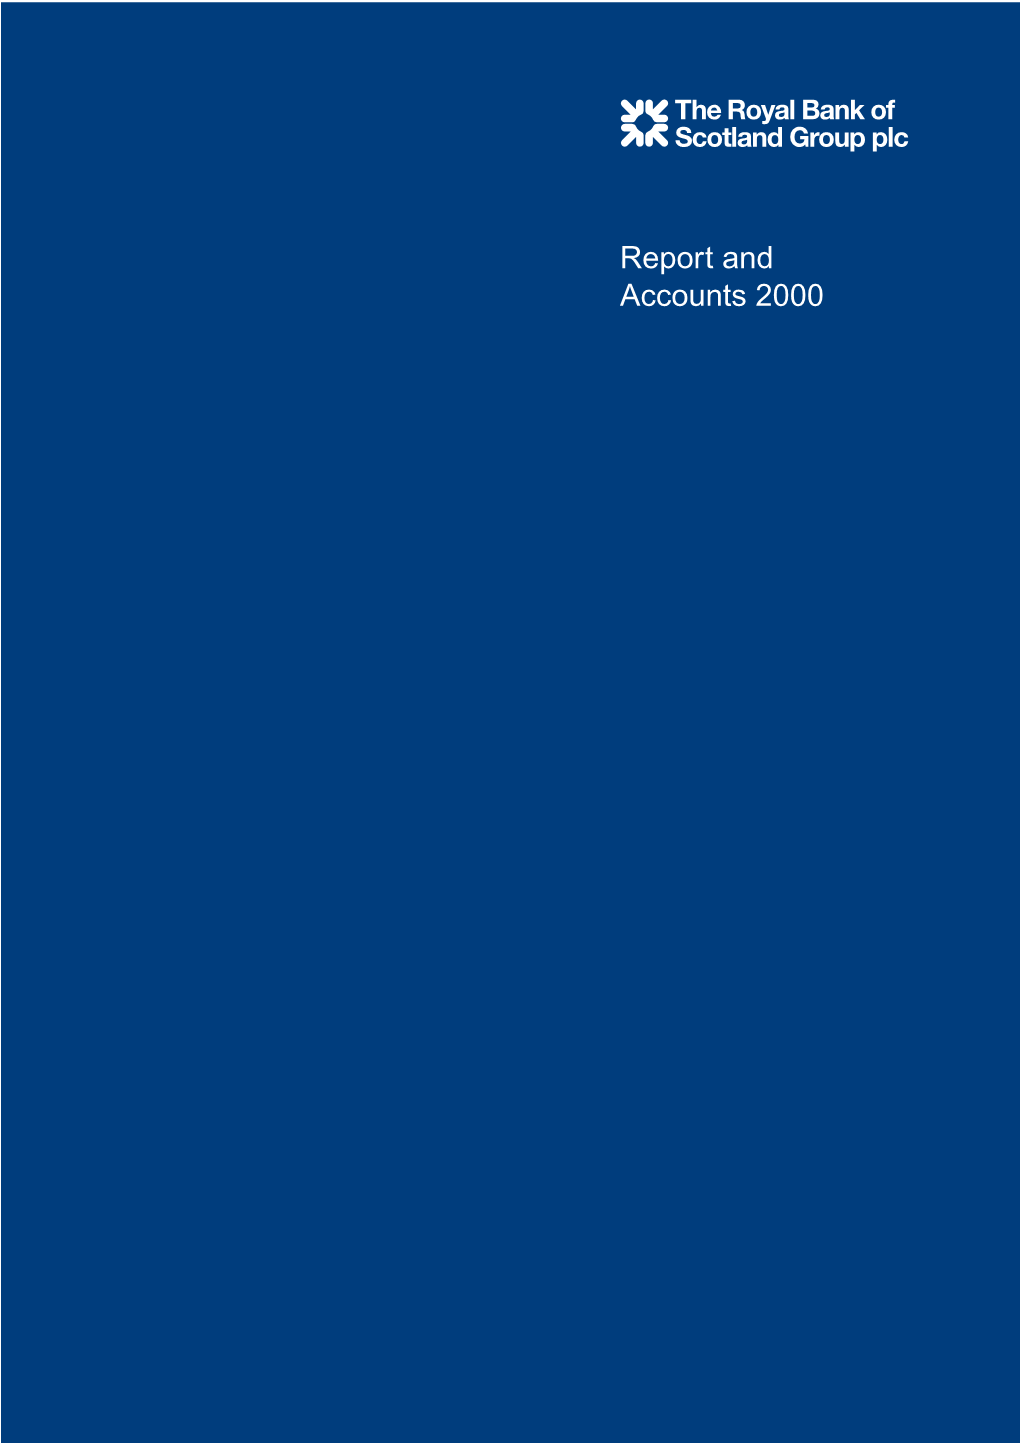 Report and Accounts 2000